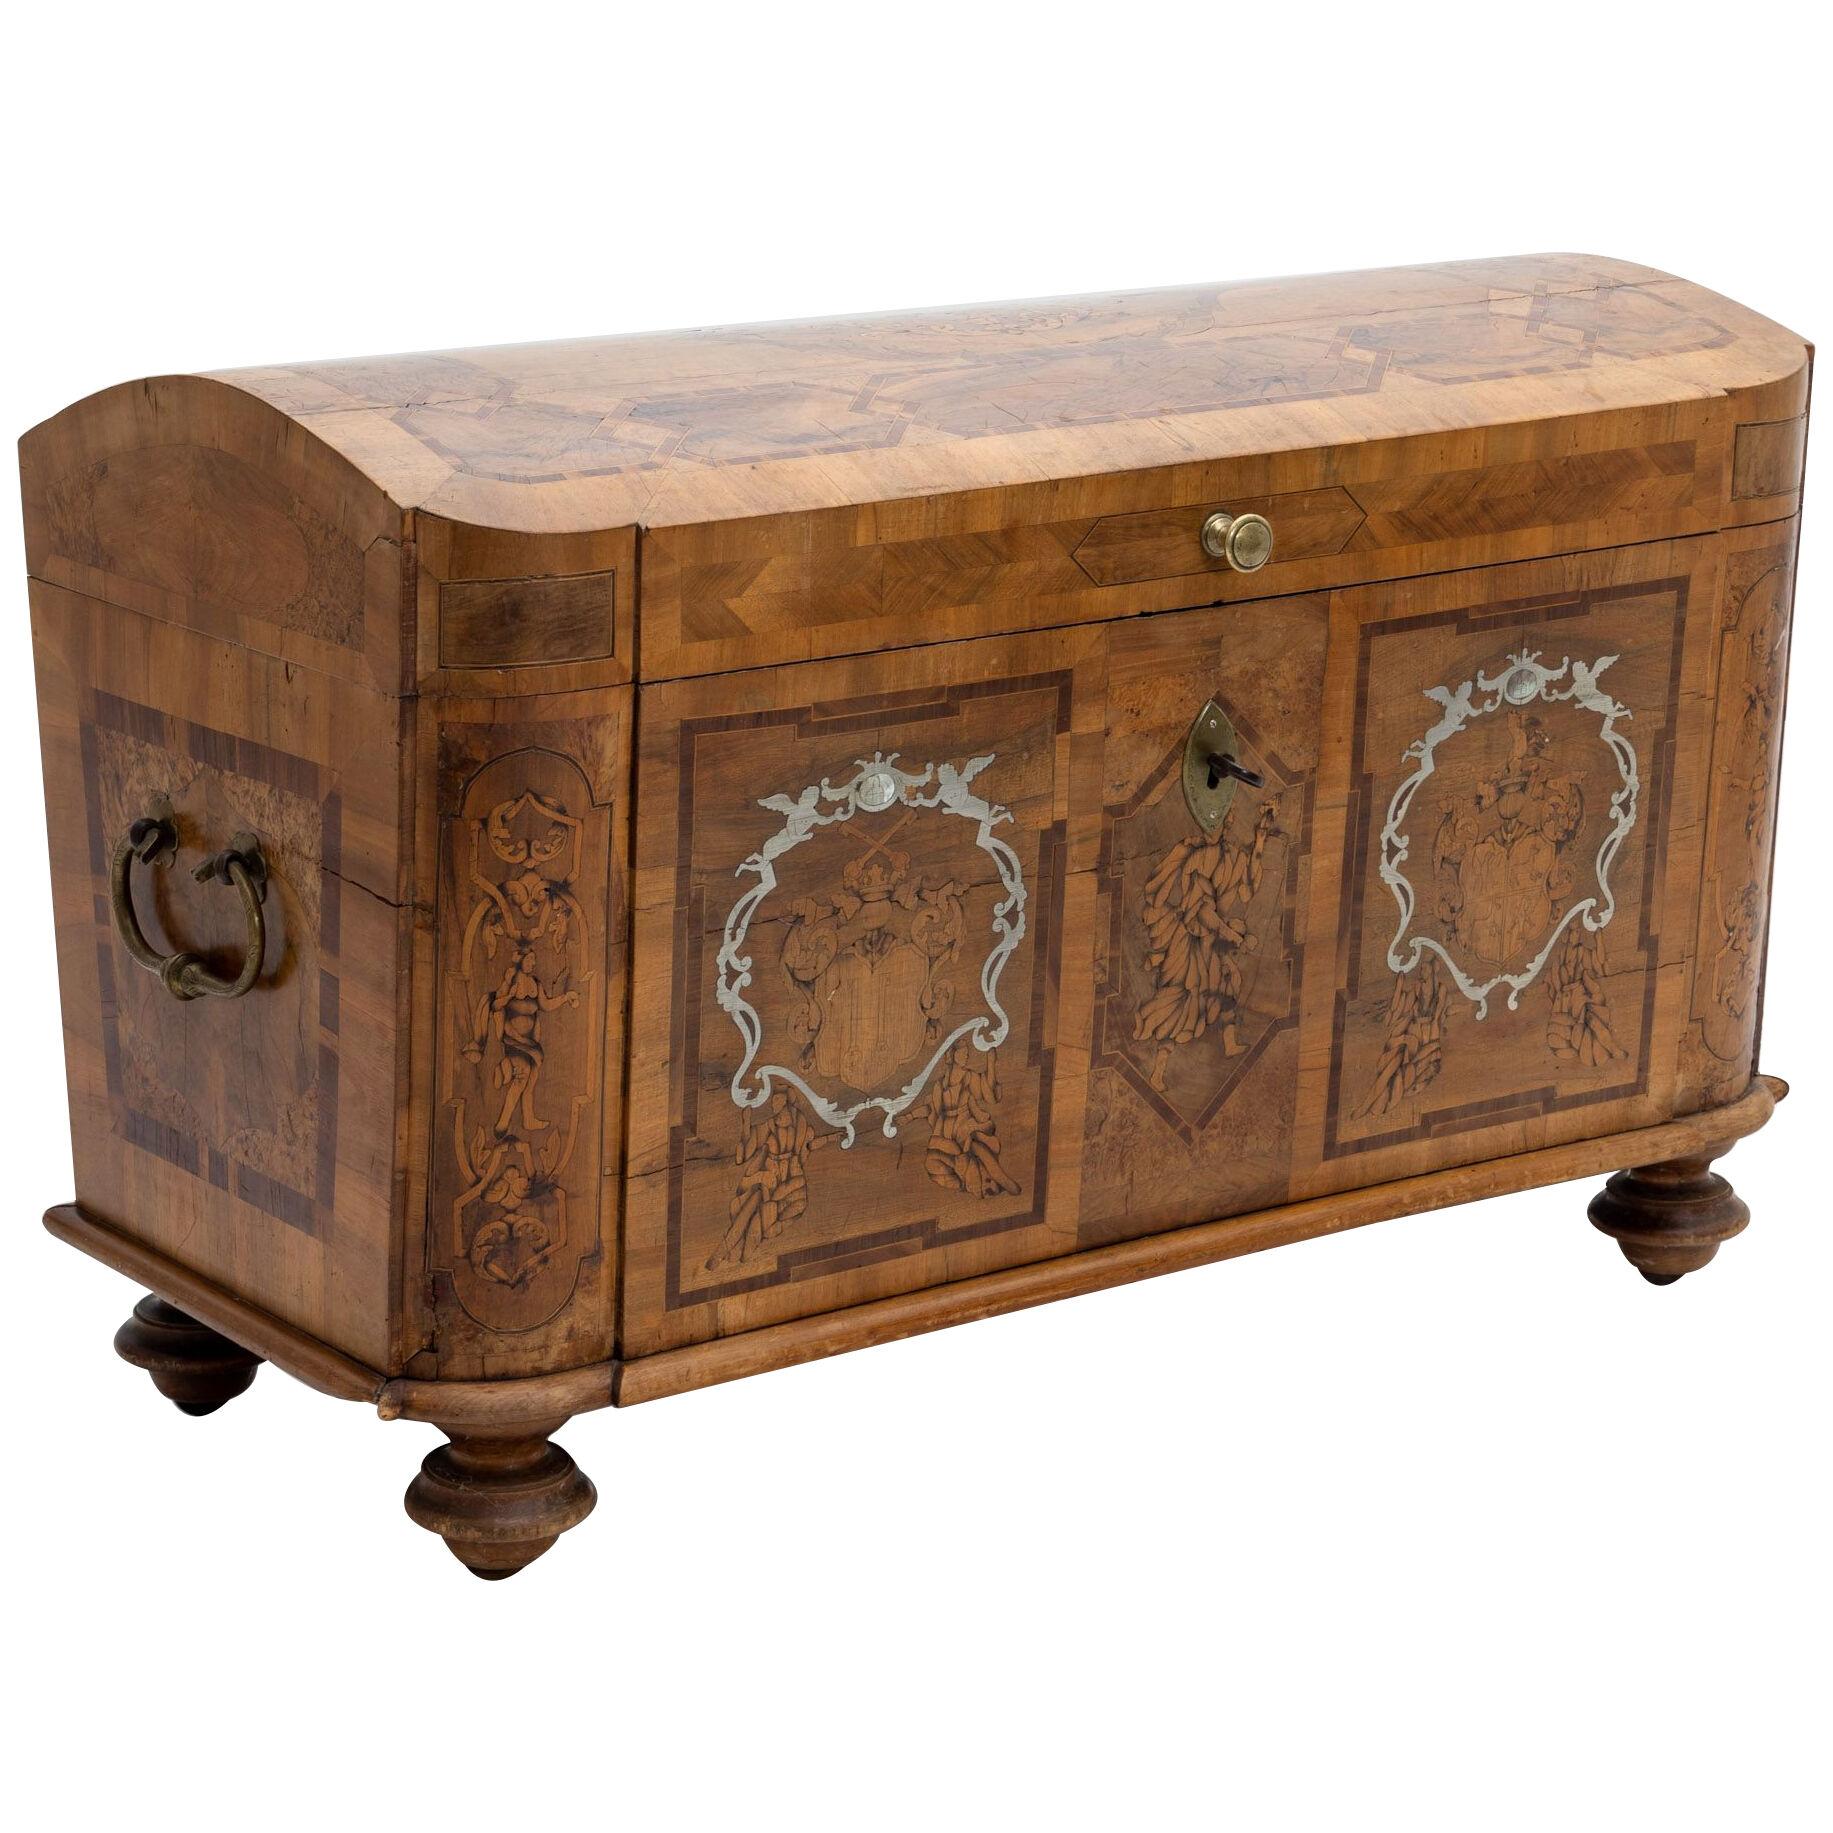 Baroque lidded chest, 18th century